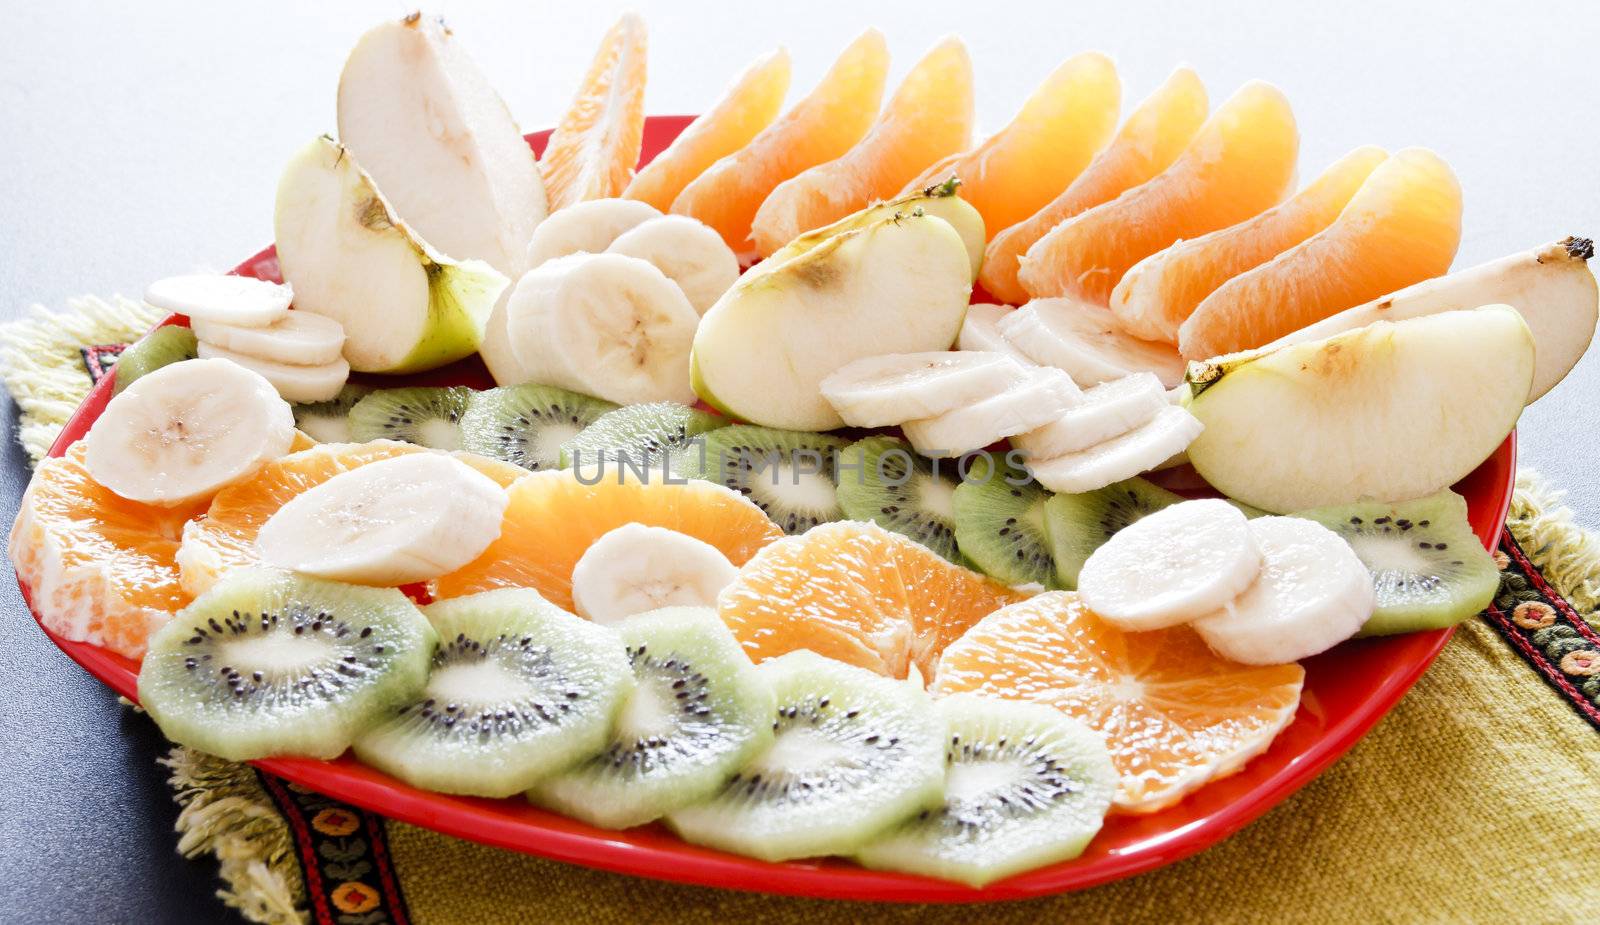 Plate with fresh fruits by manaemedia